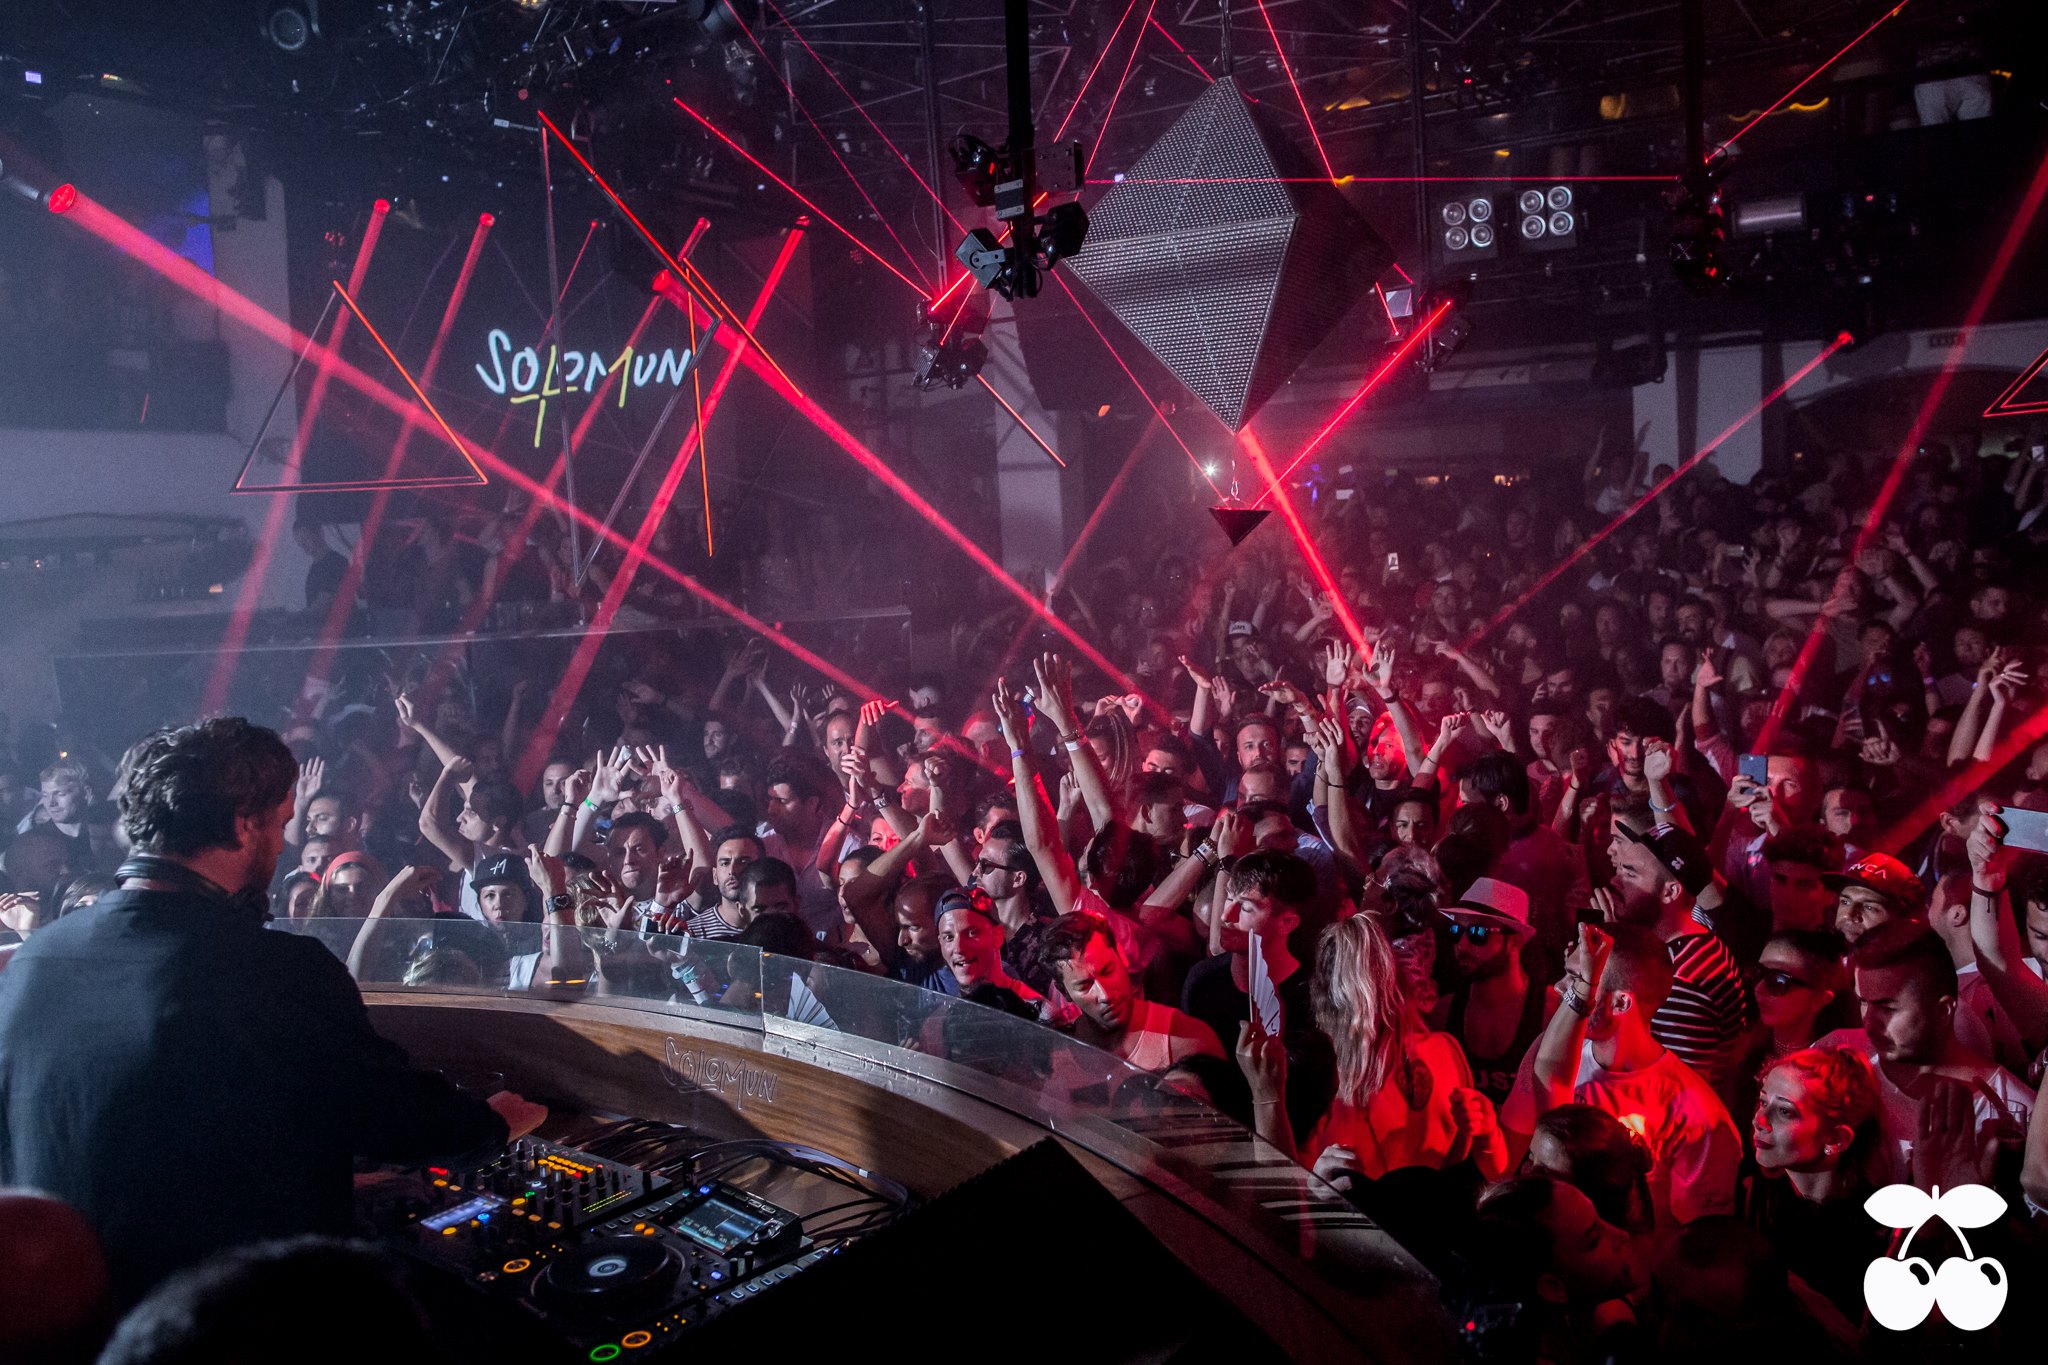 Pacha & Solomun reveal a big surprise for the closing party! by